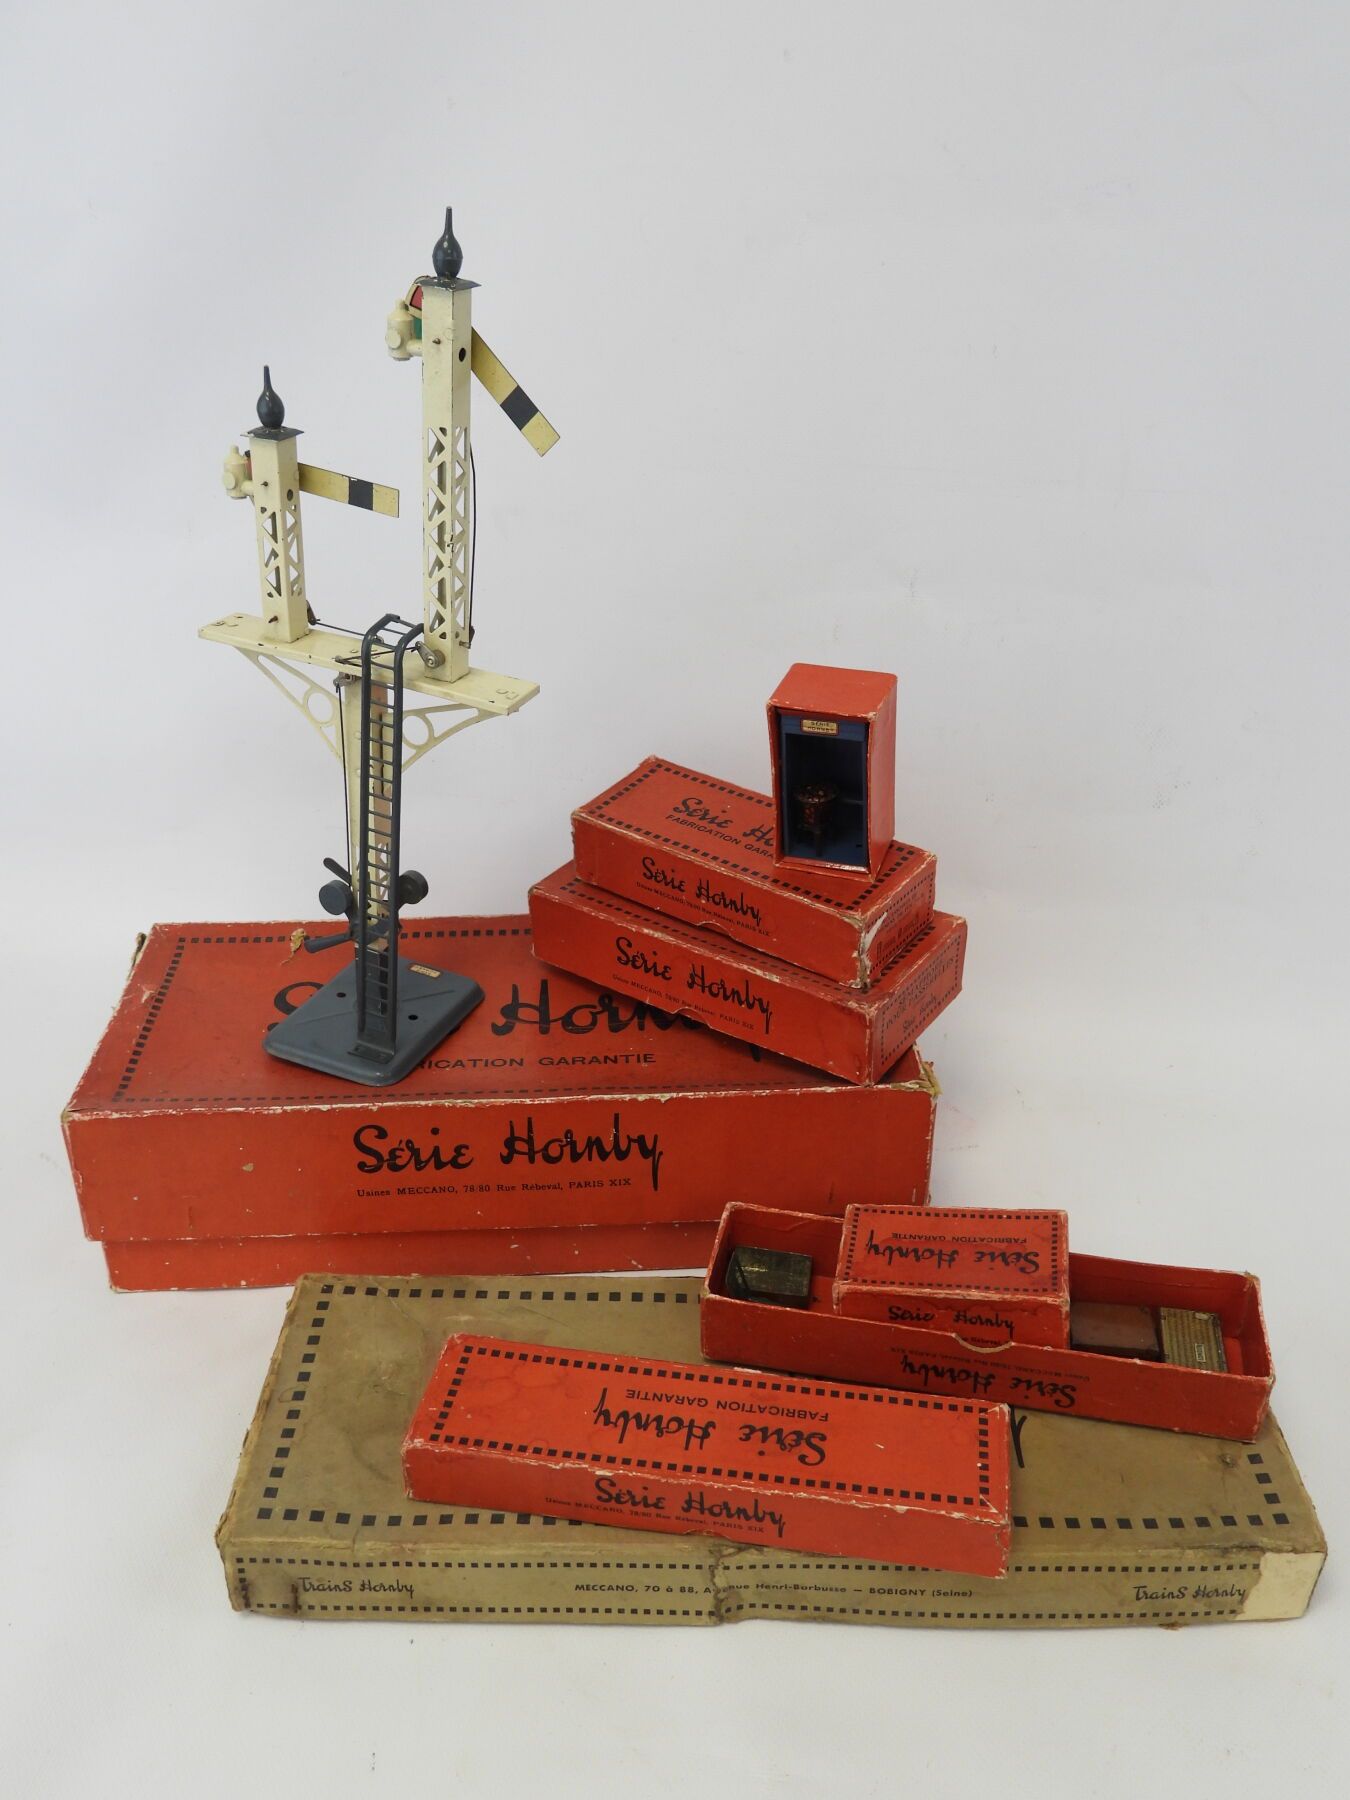 Null HORNBY : Station accessories in lithographed sheet metal. In their boxes.